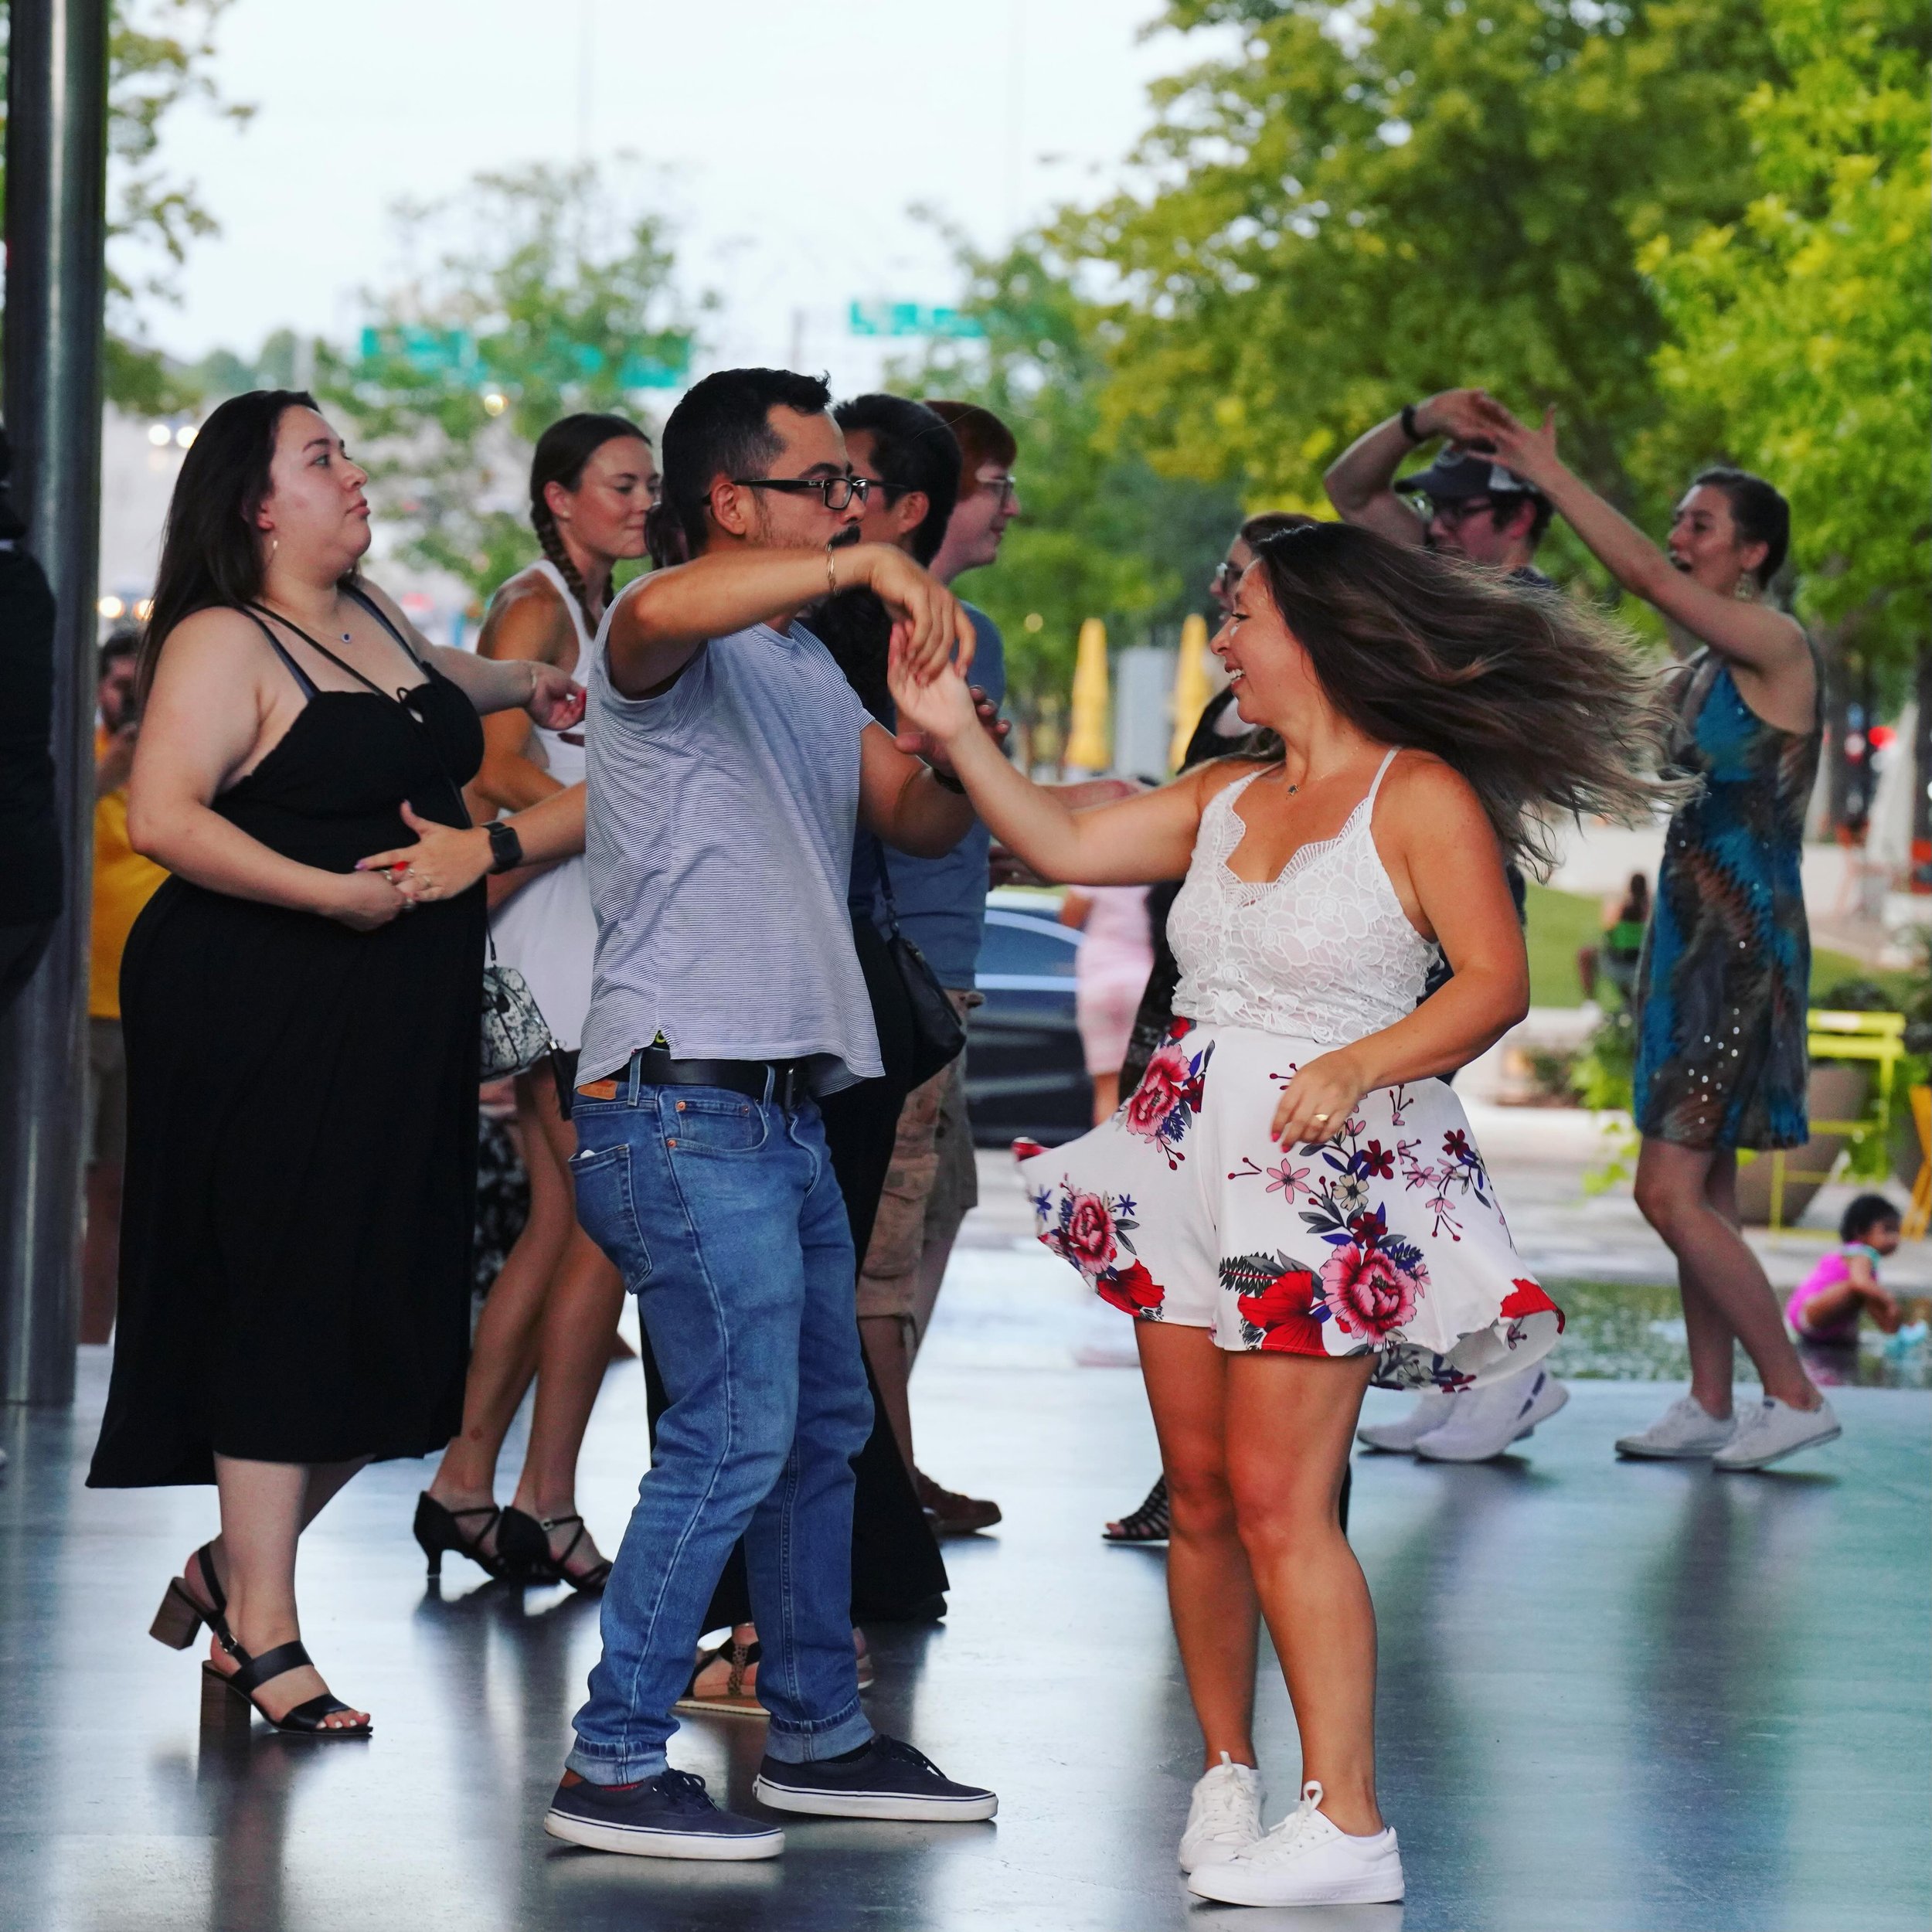 Studio 22 Salsa Class and Dance Party
Friday, May 3, 6 - 10 PM
FREE

Studio 22 is adding some sizzle to our Friday night! Sergey and Michelle will make everyone ballroom chic with their spicy steps, so enjoy a free lesson, then shake things up at the